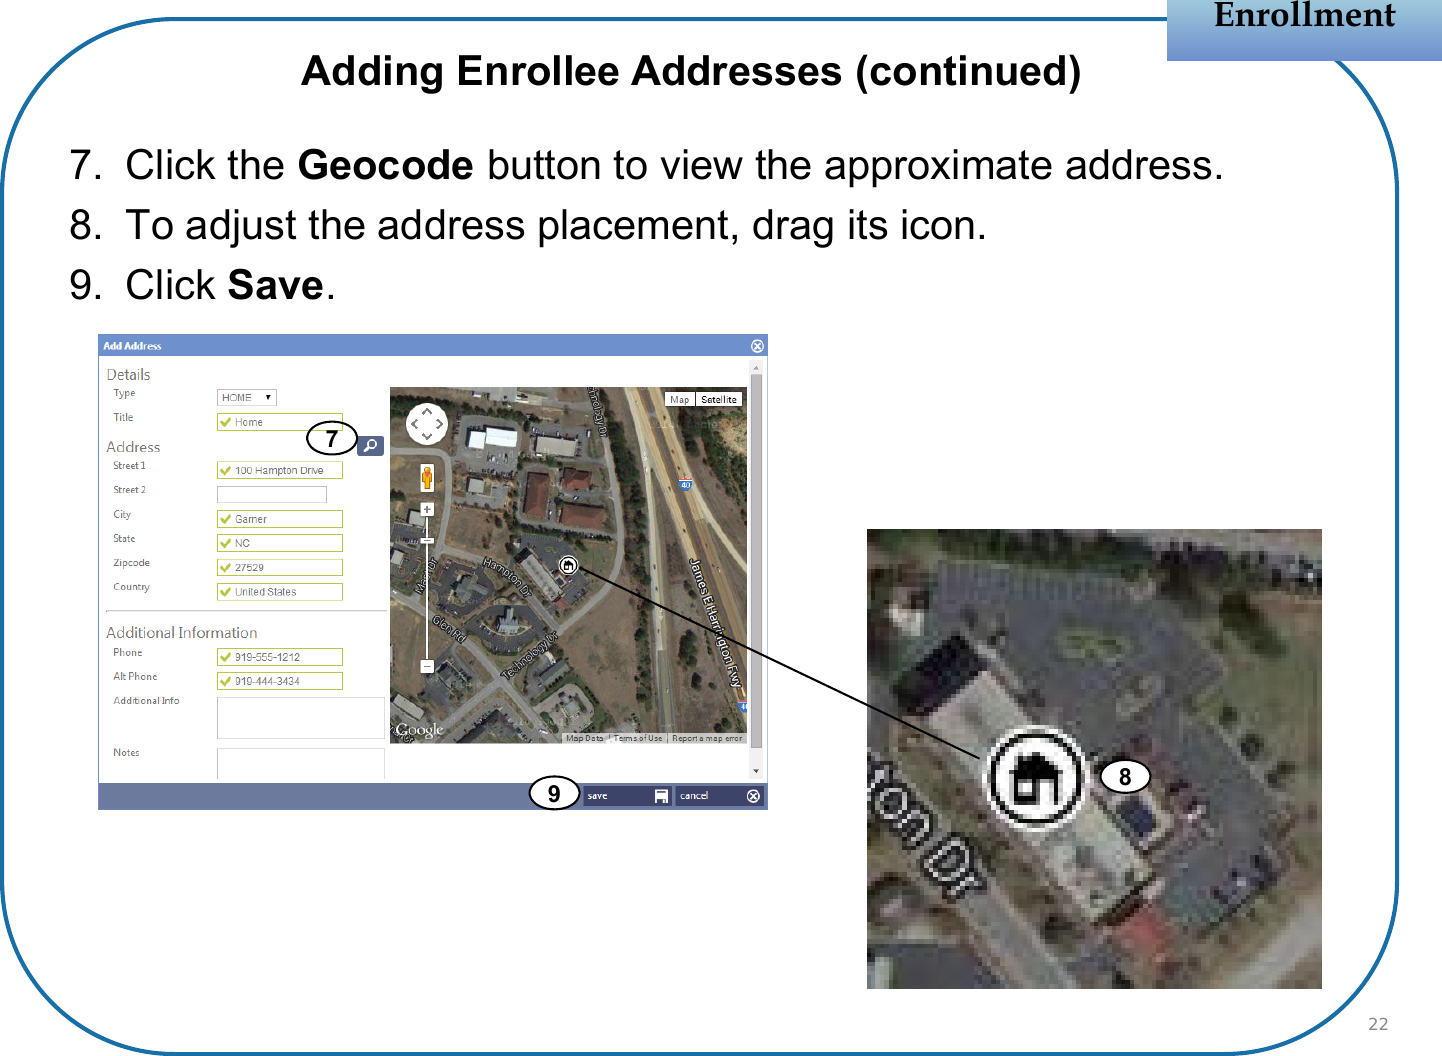 7. Click the Geocode button to view the approximate address.8. To adjust the address placement, drag its icon.9. Click Save.EnrollmentEnrollment22Adding Enrollee Addresses (continued)789